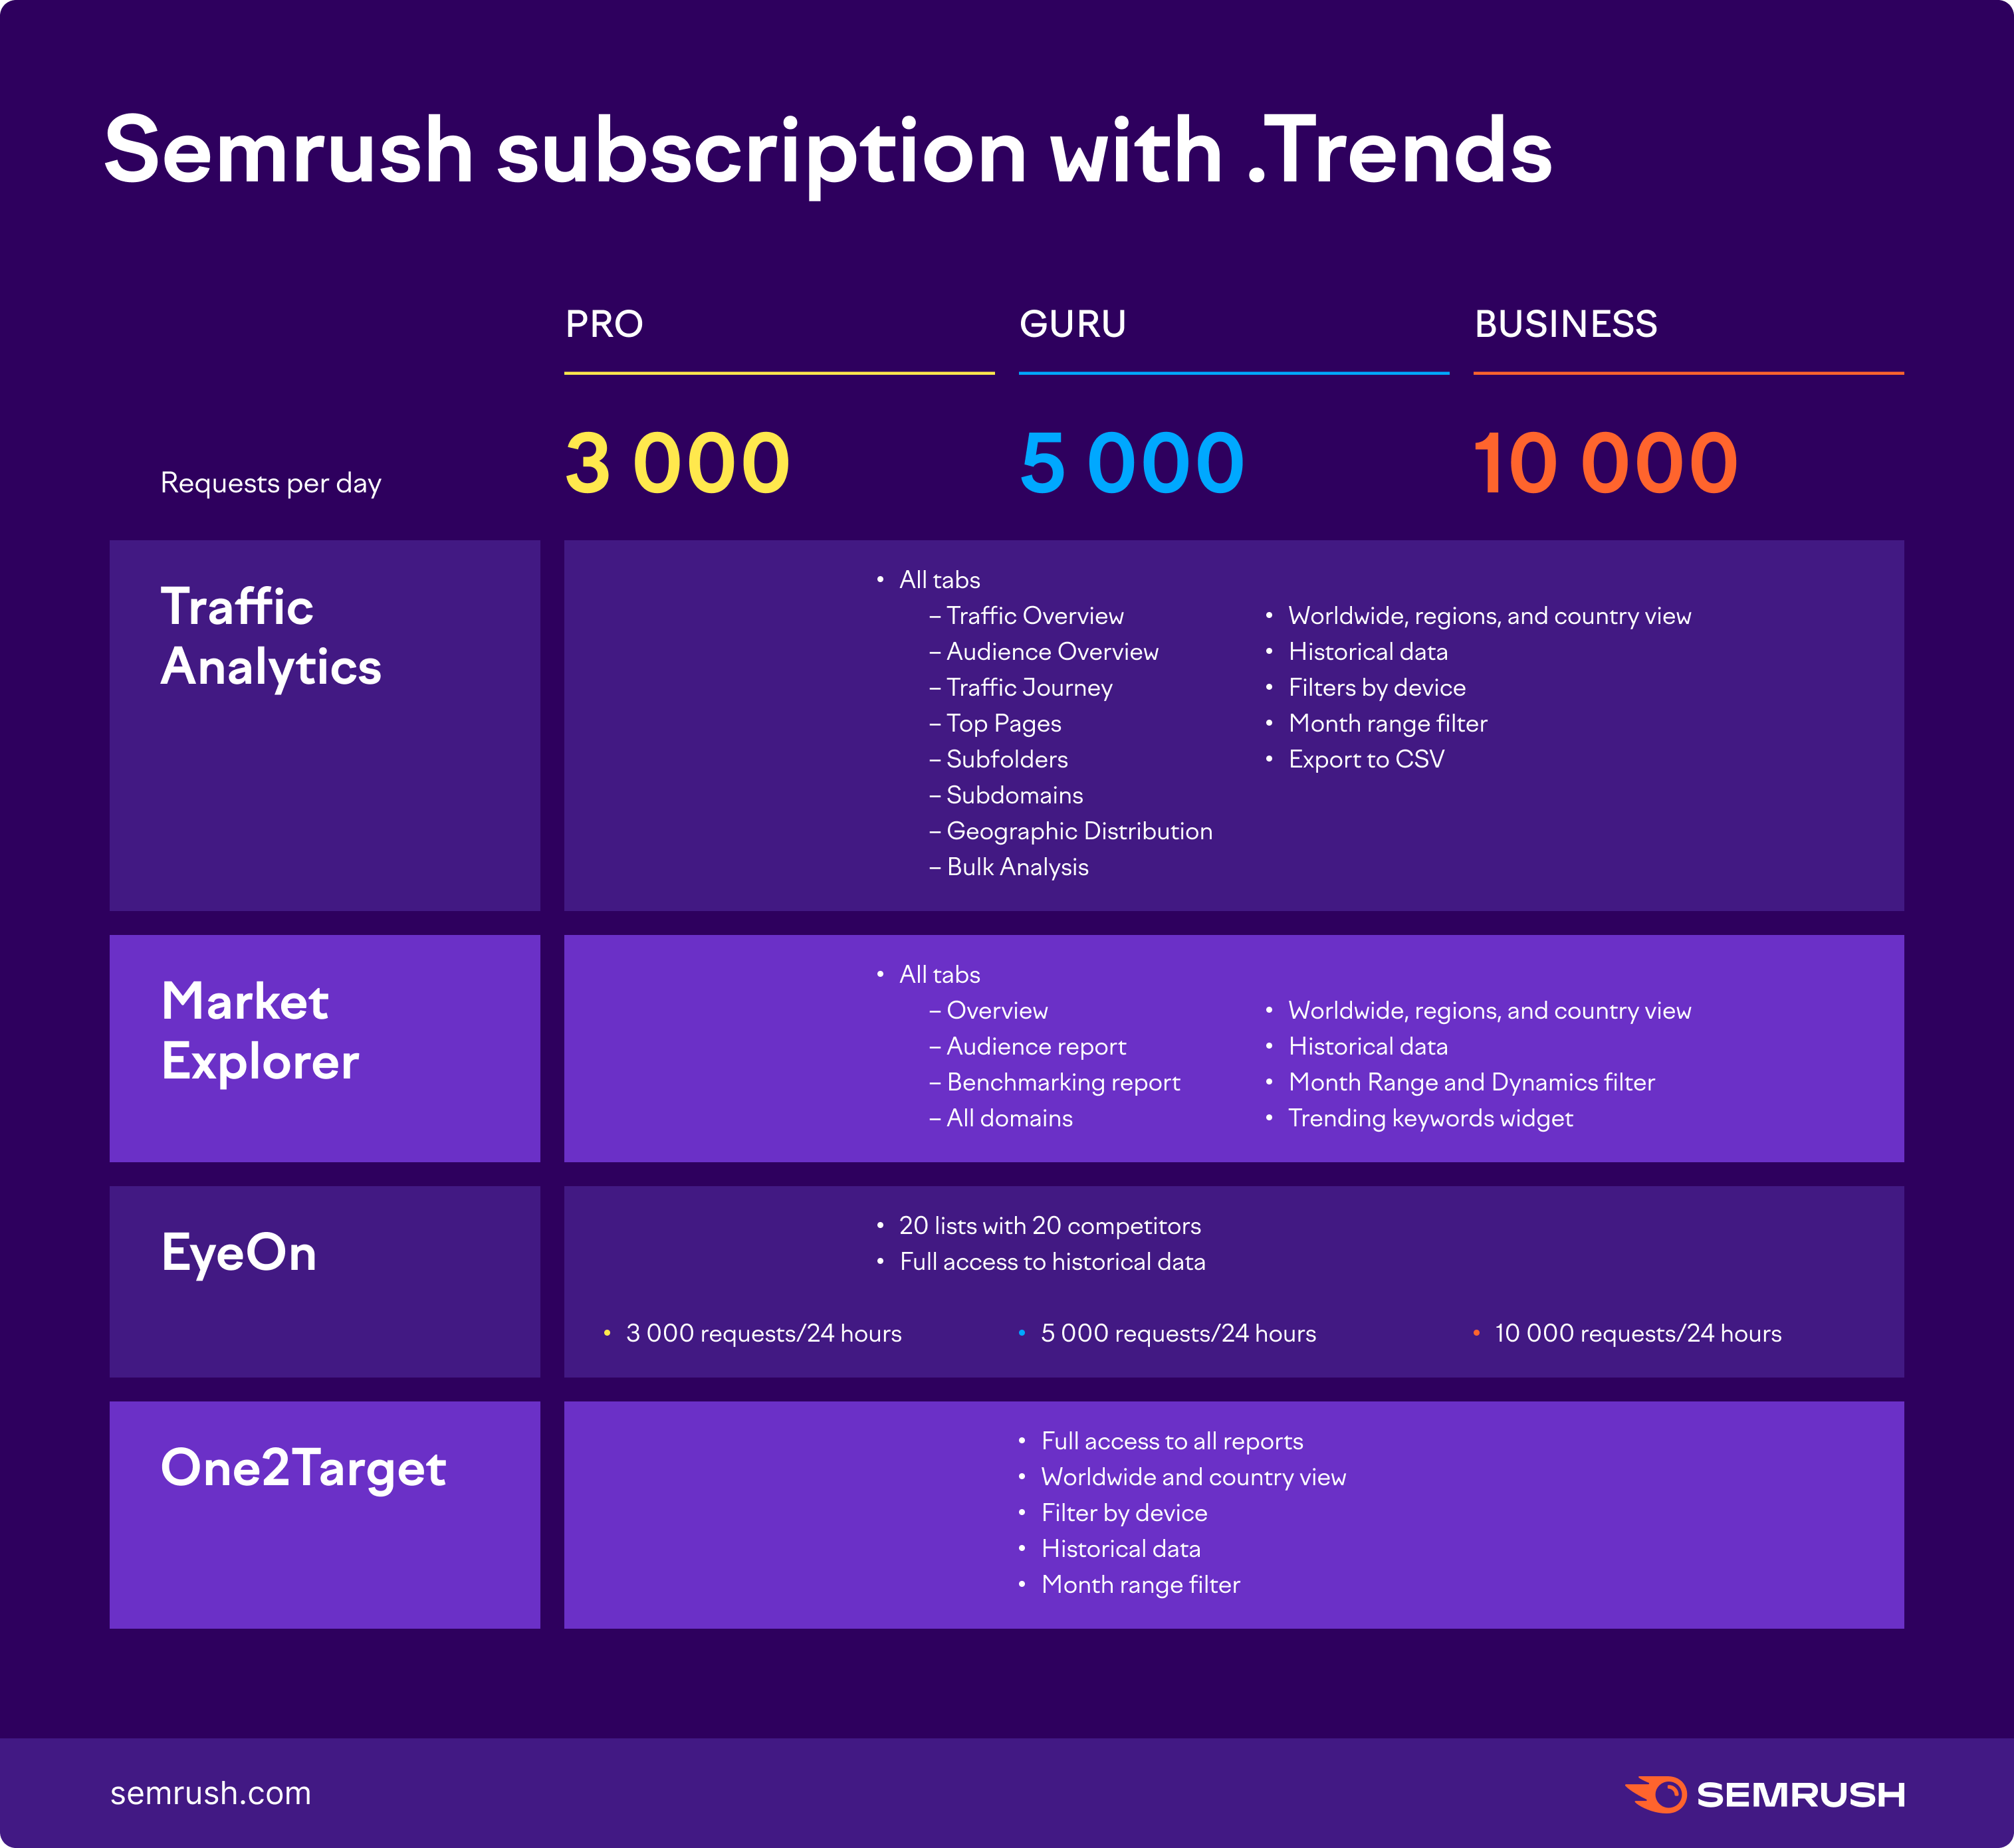 Semrush subscription with .Trends requests per day. Pro plans: 3000 requests per day. Guru plans: 5000 requests per day. Business plans: 10000 requests per day. 